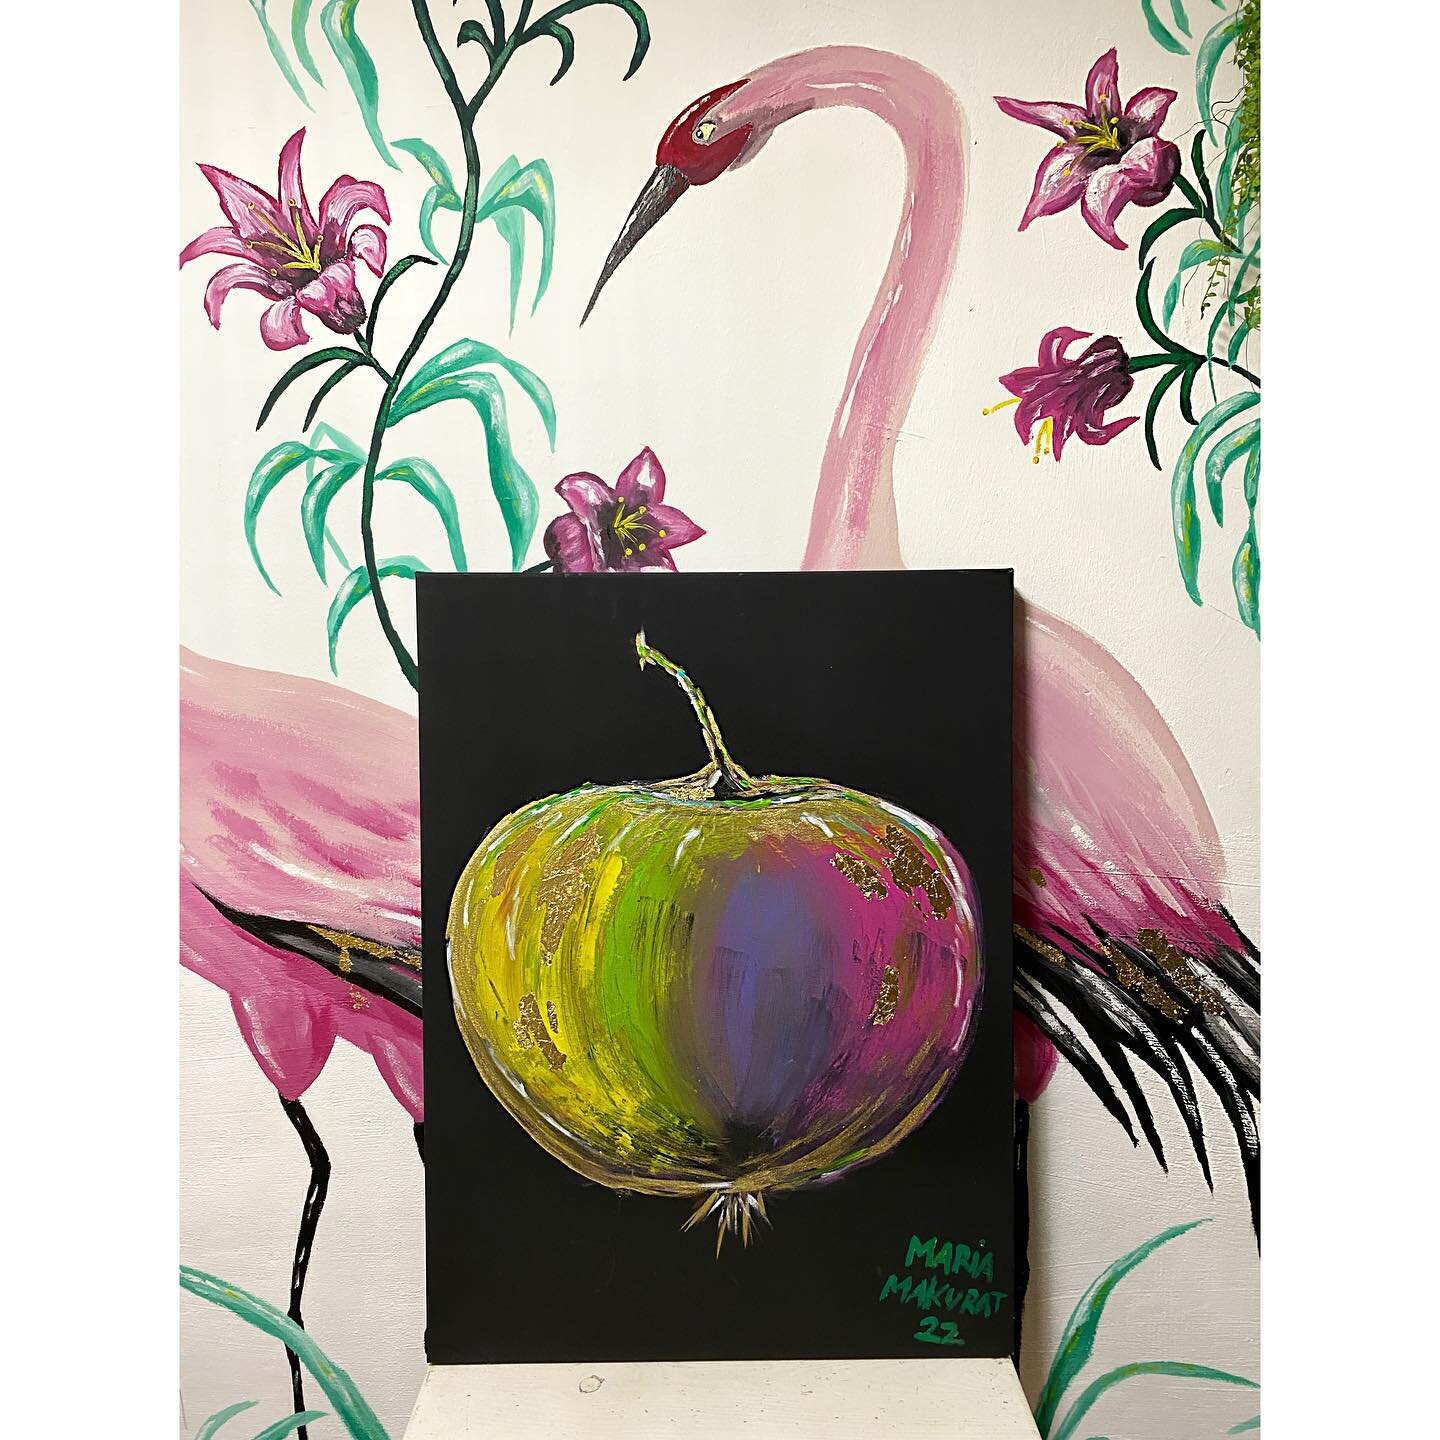 The apple in full glory 🍏 Have a nice week! Let me know what you think 🖤🖤🖤 keywords: art artists apple painting acrylic decoration maximalism gold #rembrandtartistpaint